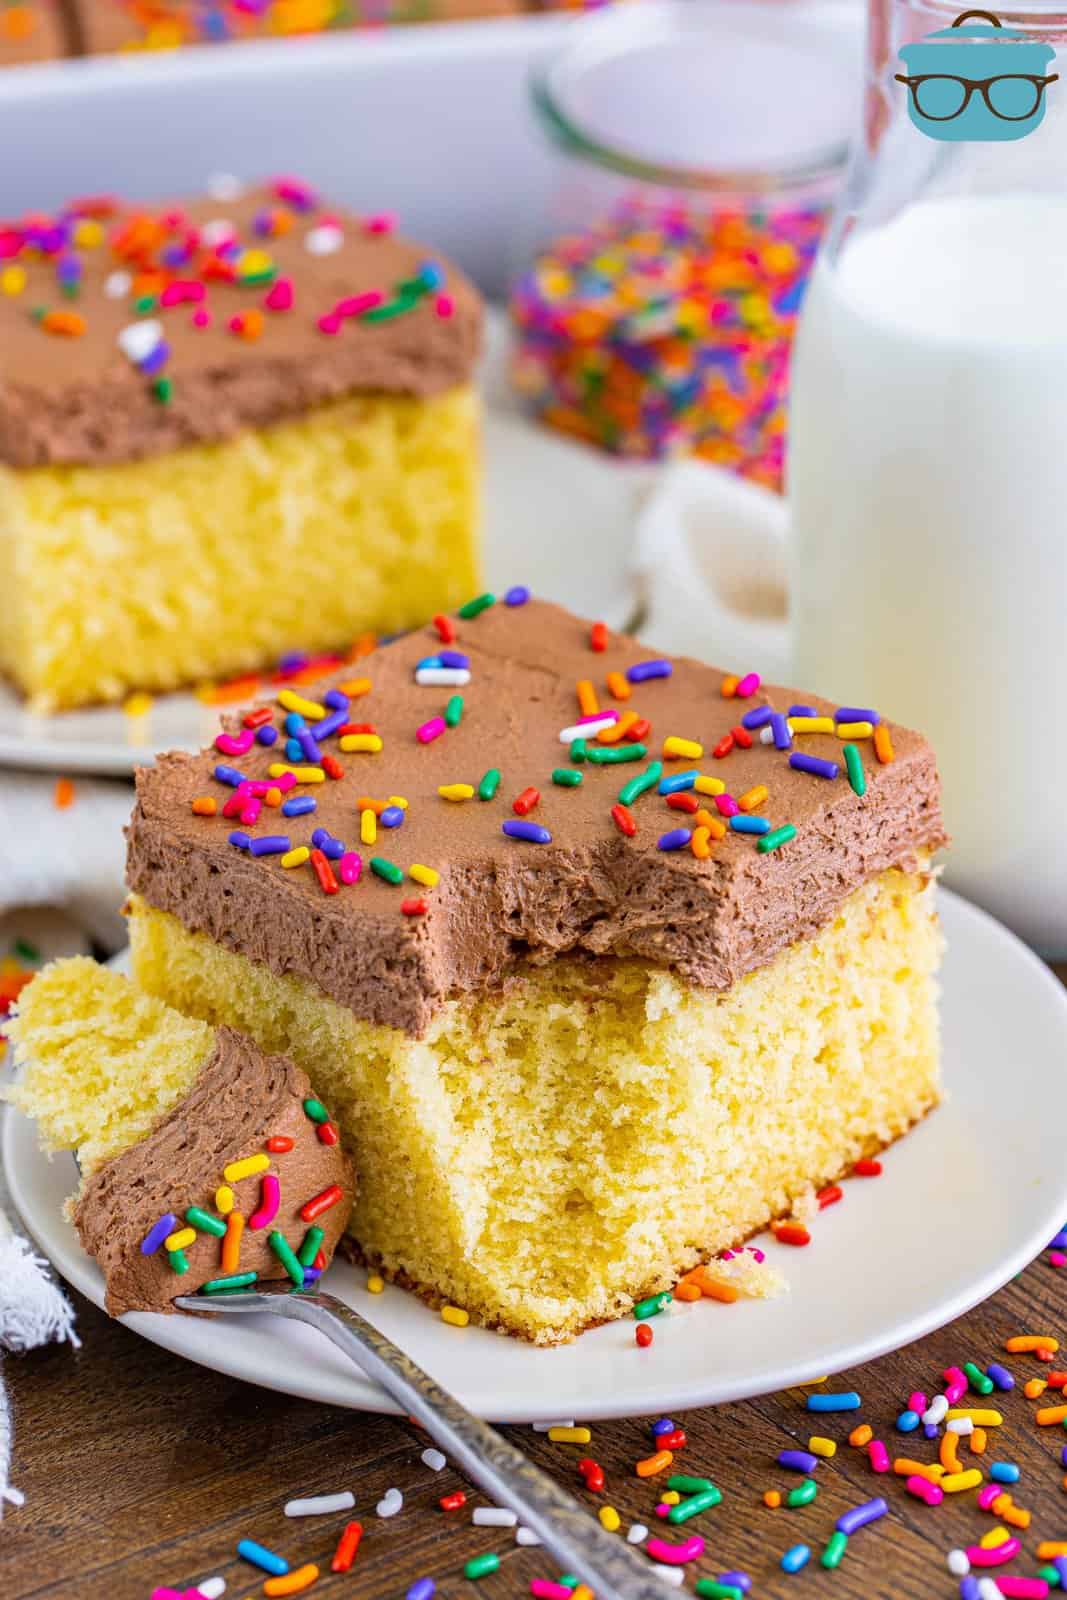 A plate with a slice of yellow cake with chocolate frosting and a bite taken out.